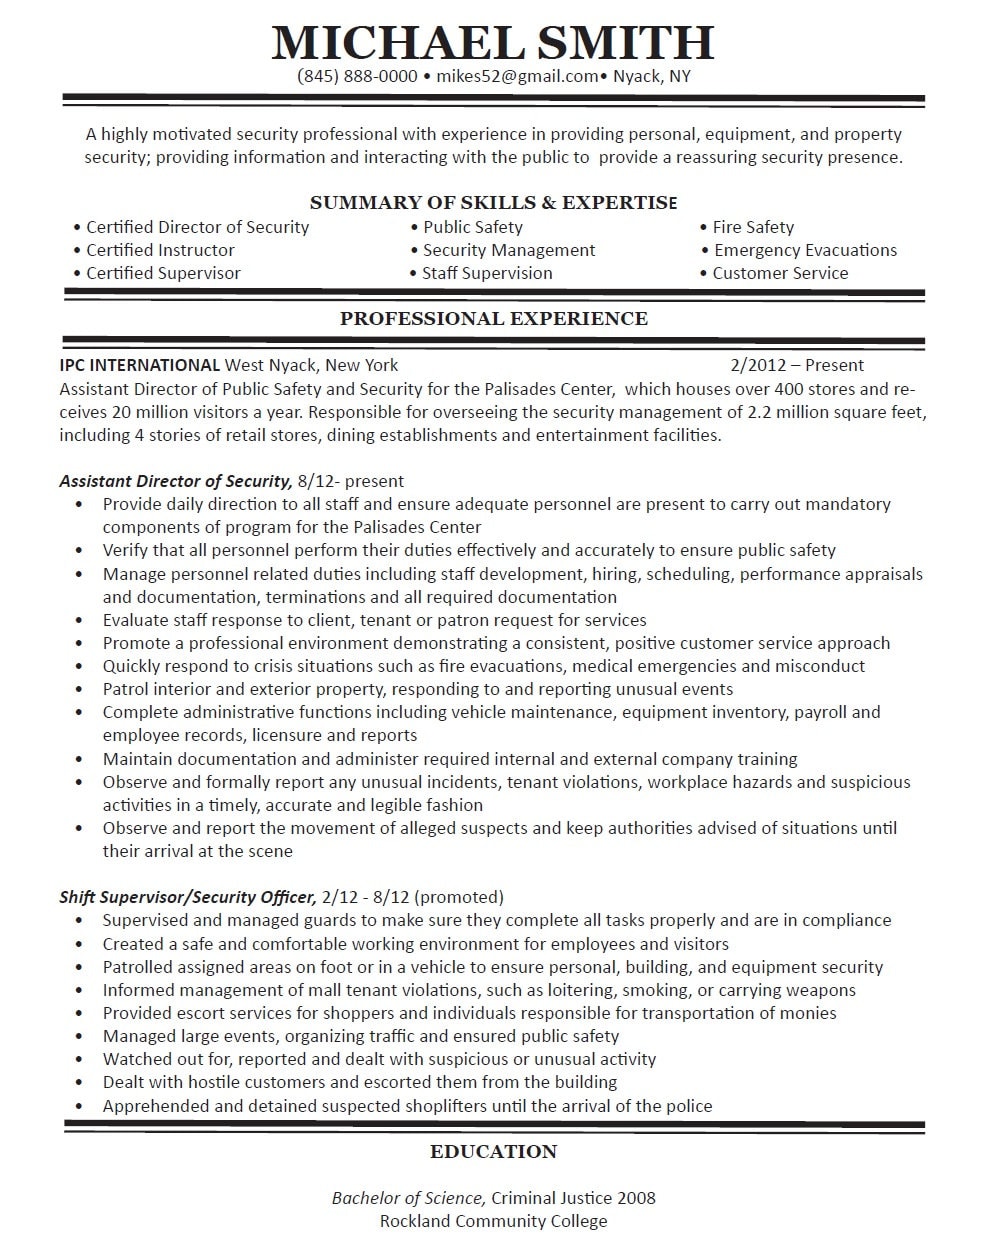 Professional resume writers online